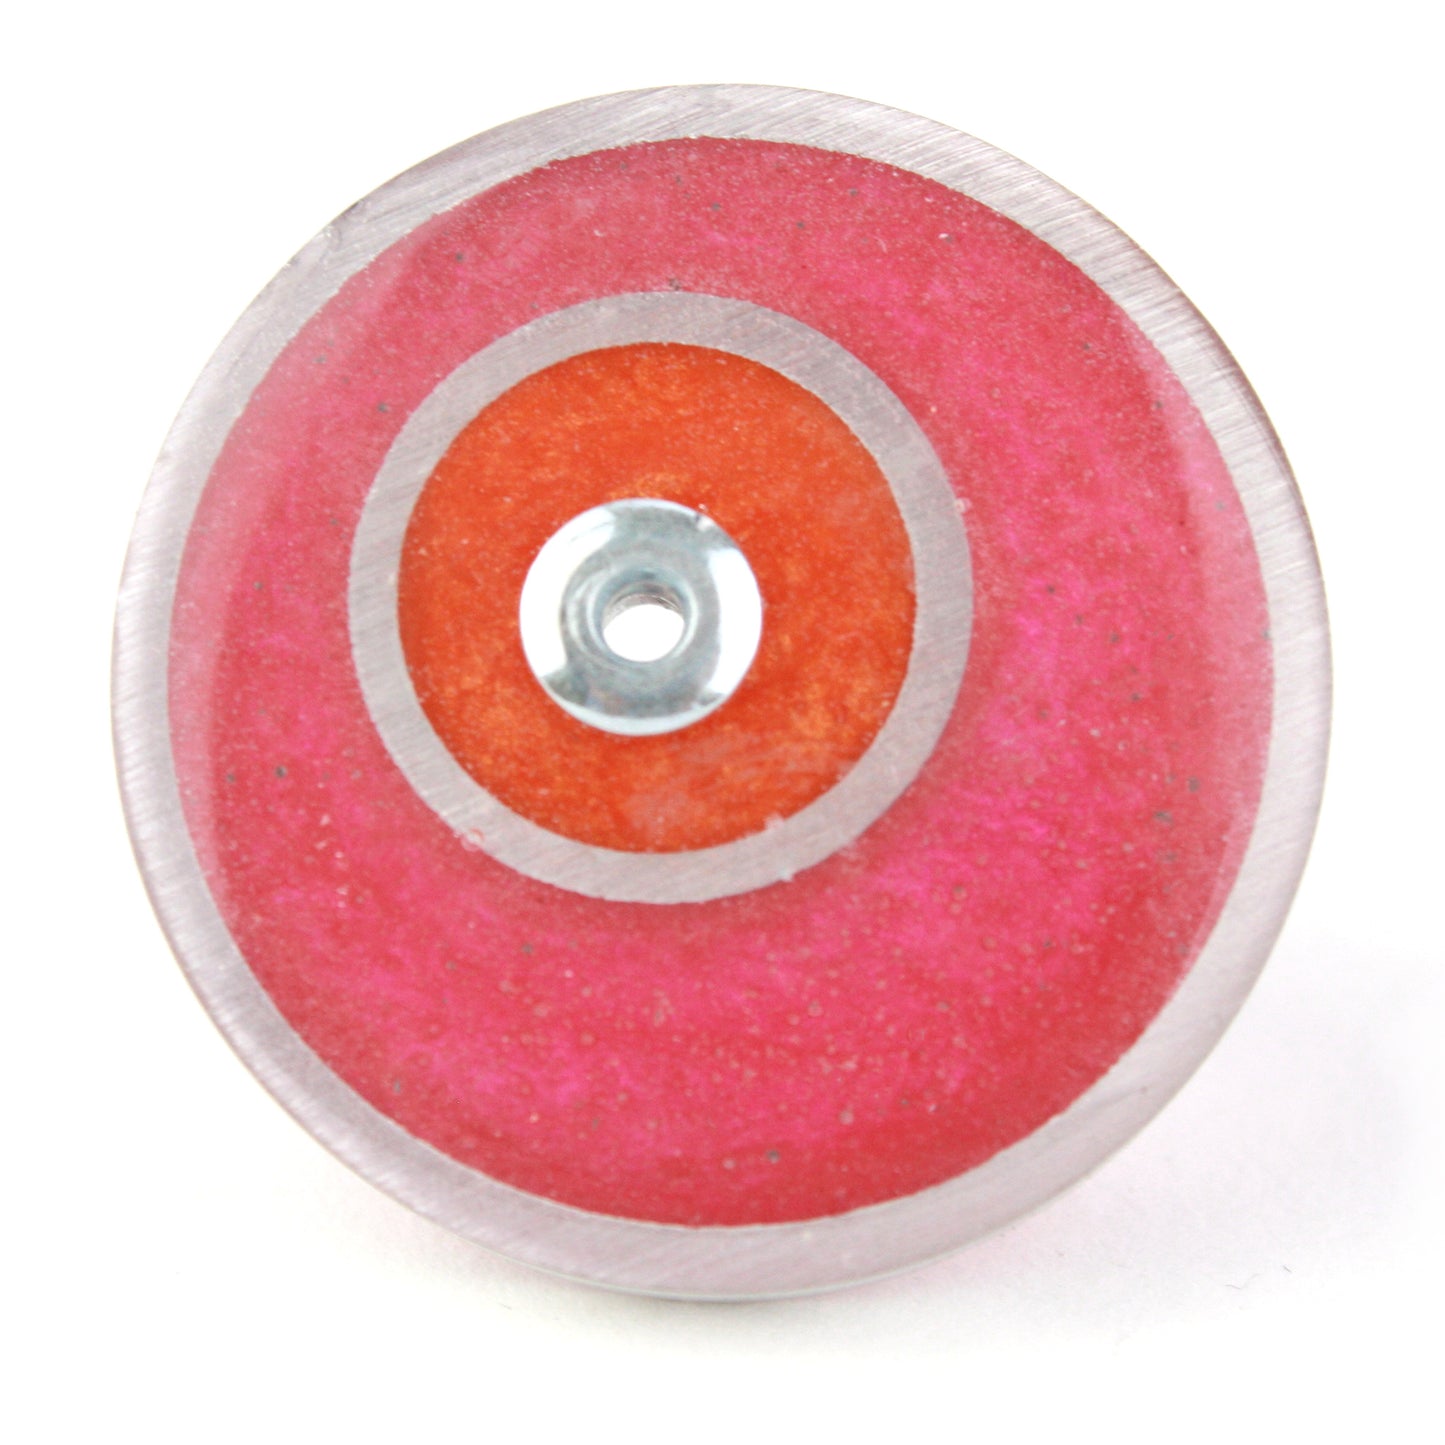 Resinique double circle ring - Pink and orange